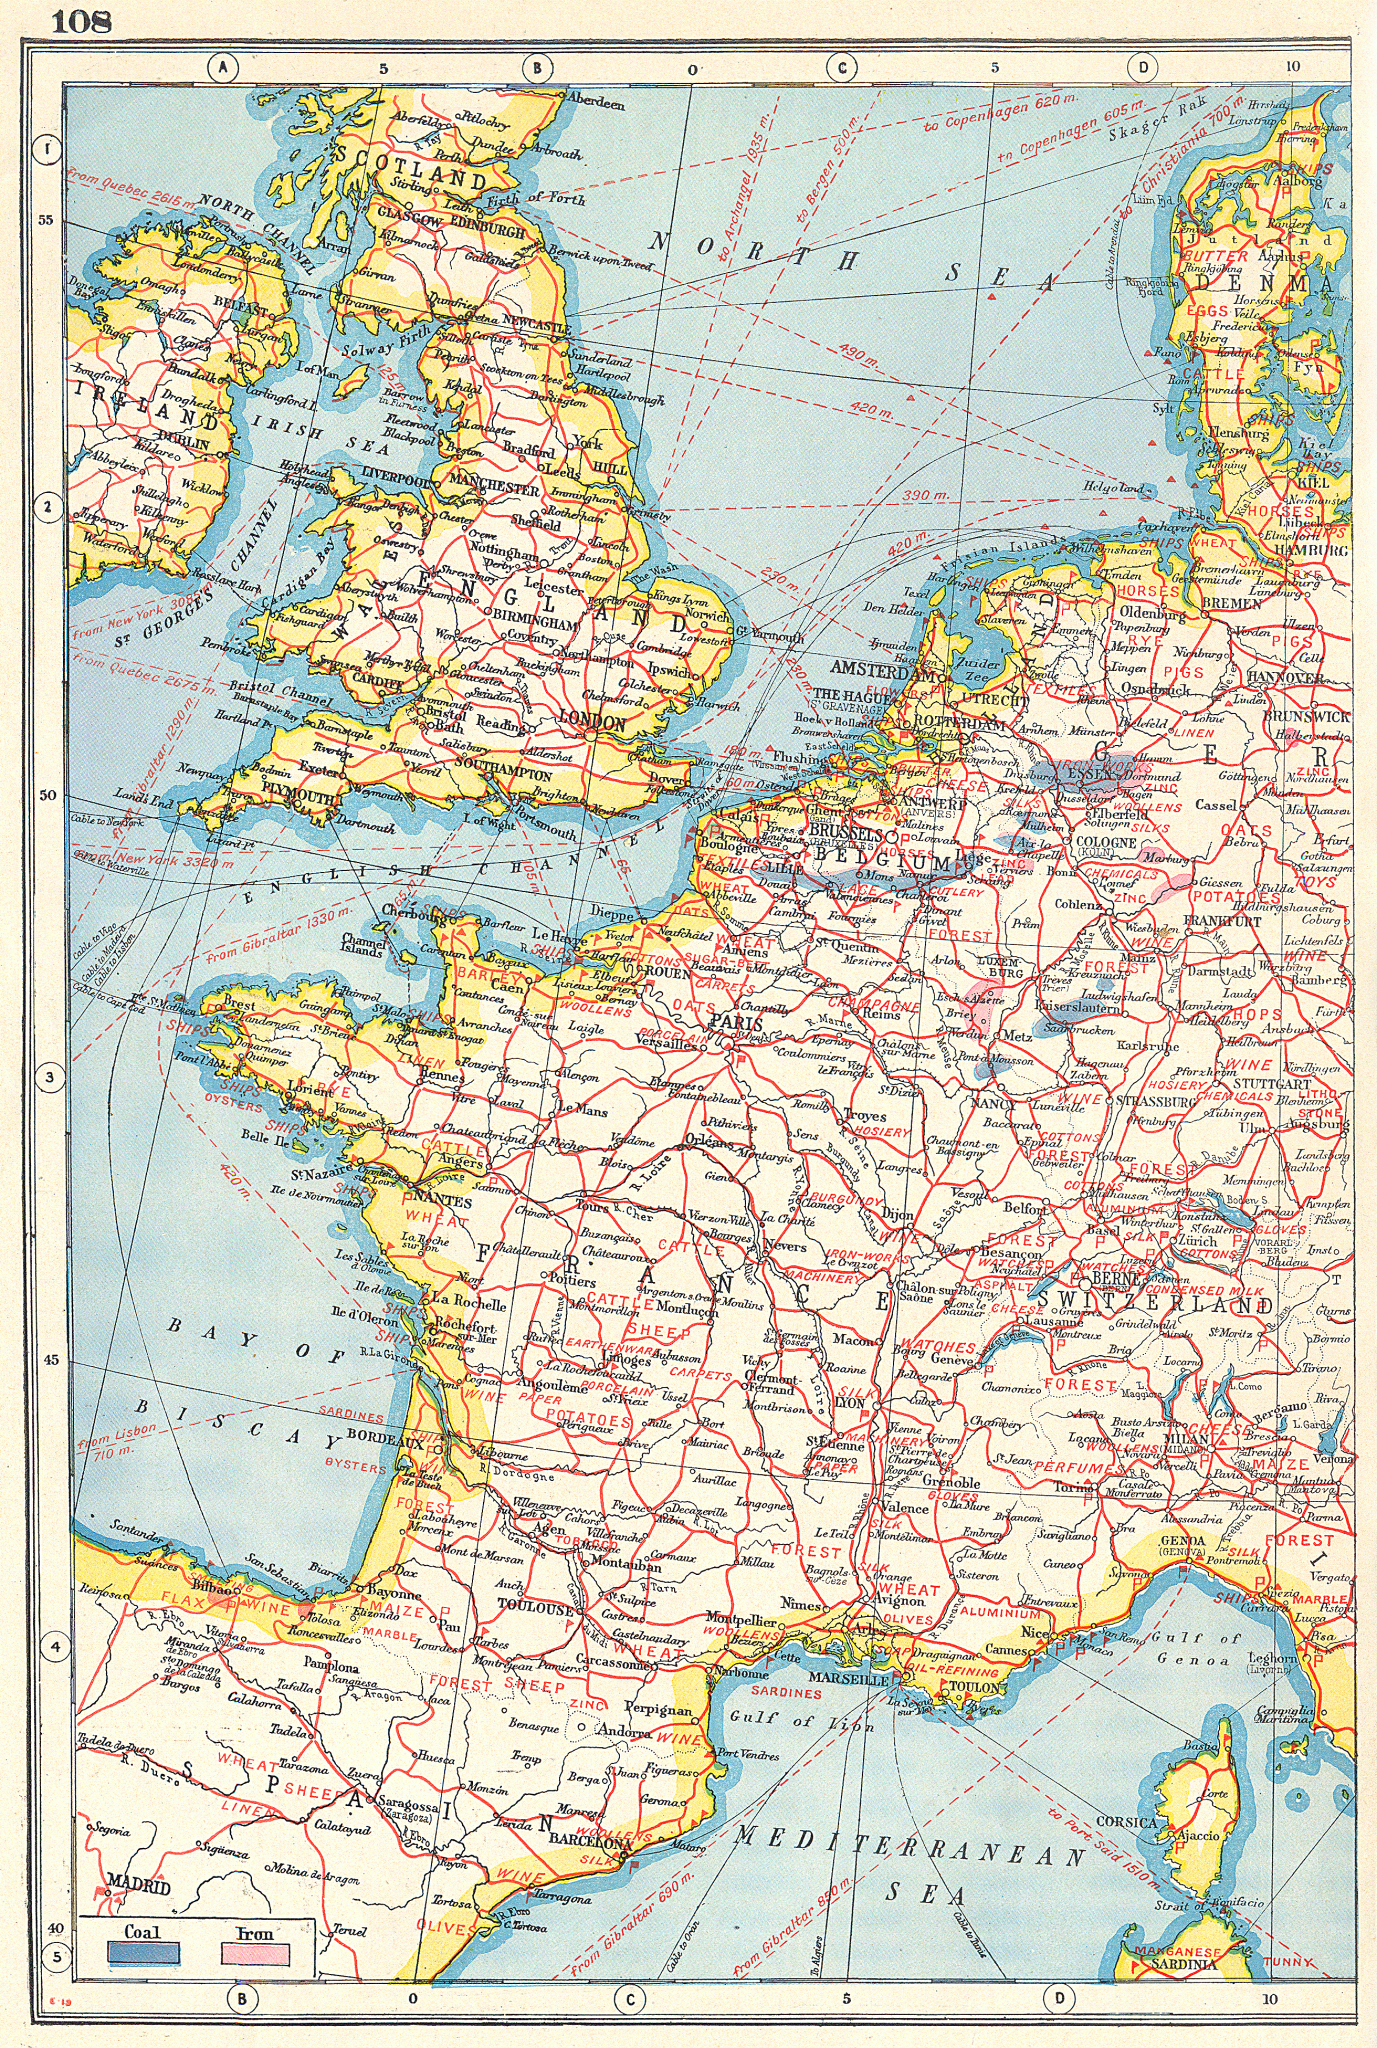 Associate Product WESTERN EUROPE AGRICULTURAL & INDUSTRIAL PRODUCTS. France UK Benelux 1920 map